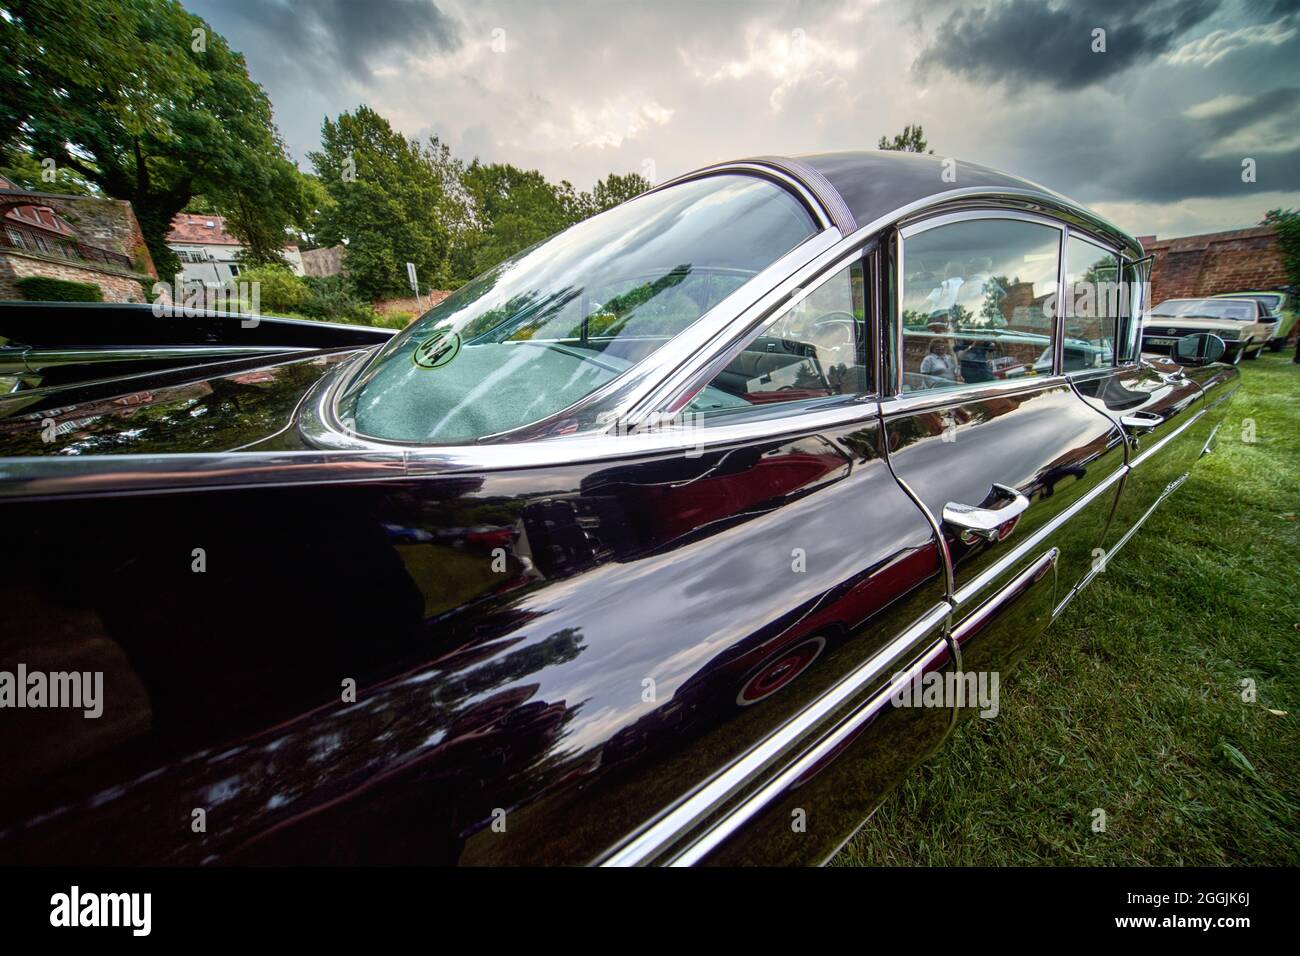 Cadillac Fleetwood, rear view of the classic American road cruiser from 1959 with large tail fins in Lehnin, Germany, August 21, 2021,illustrative edi Stock Photo